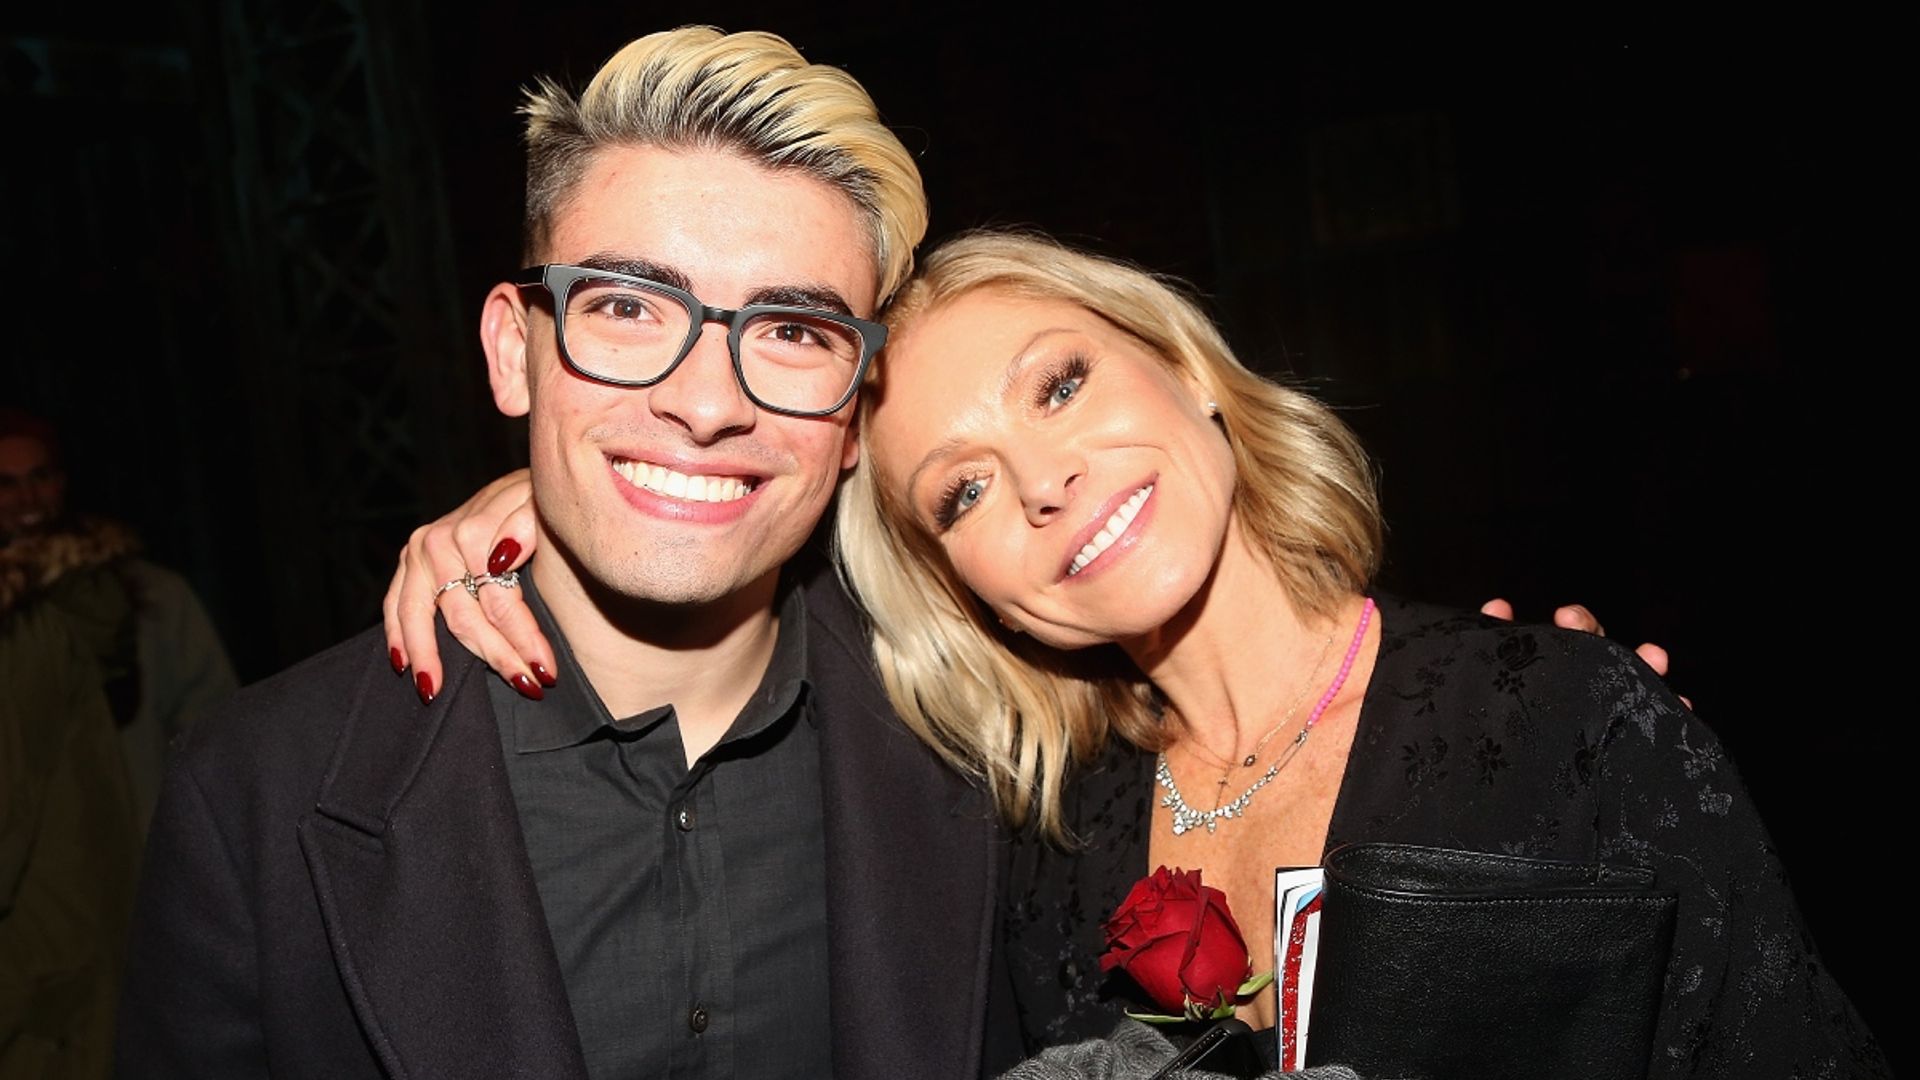 Kelly Ripa's son Michael Consuelos opens up about his surprising relationship with his parents